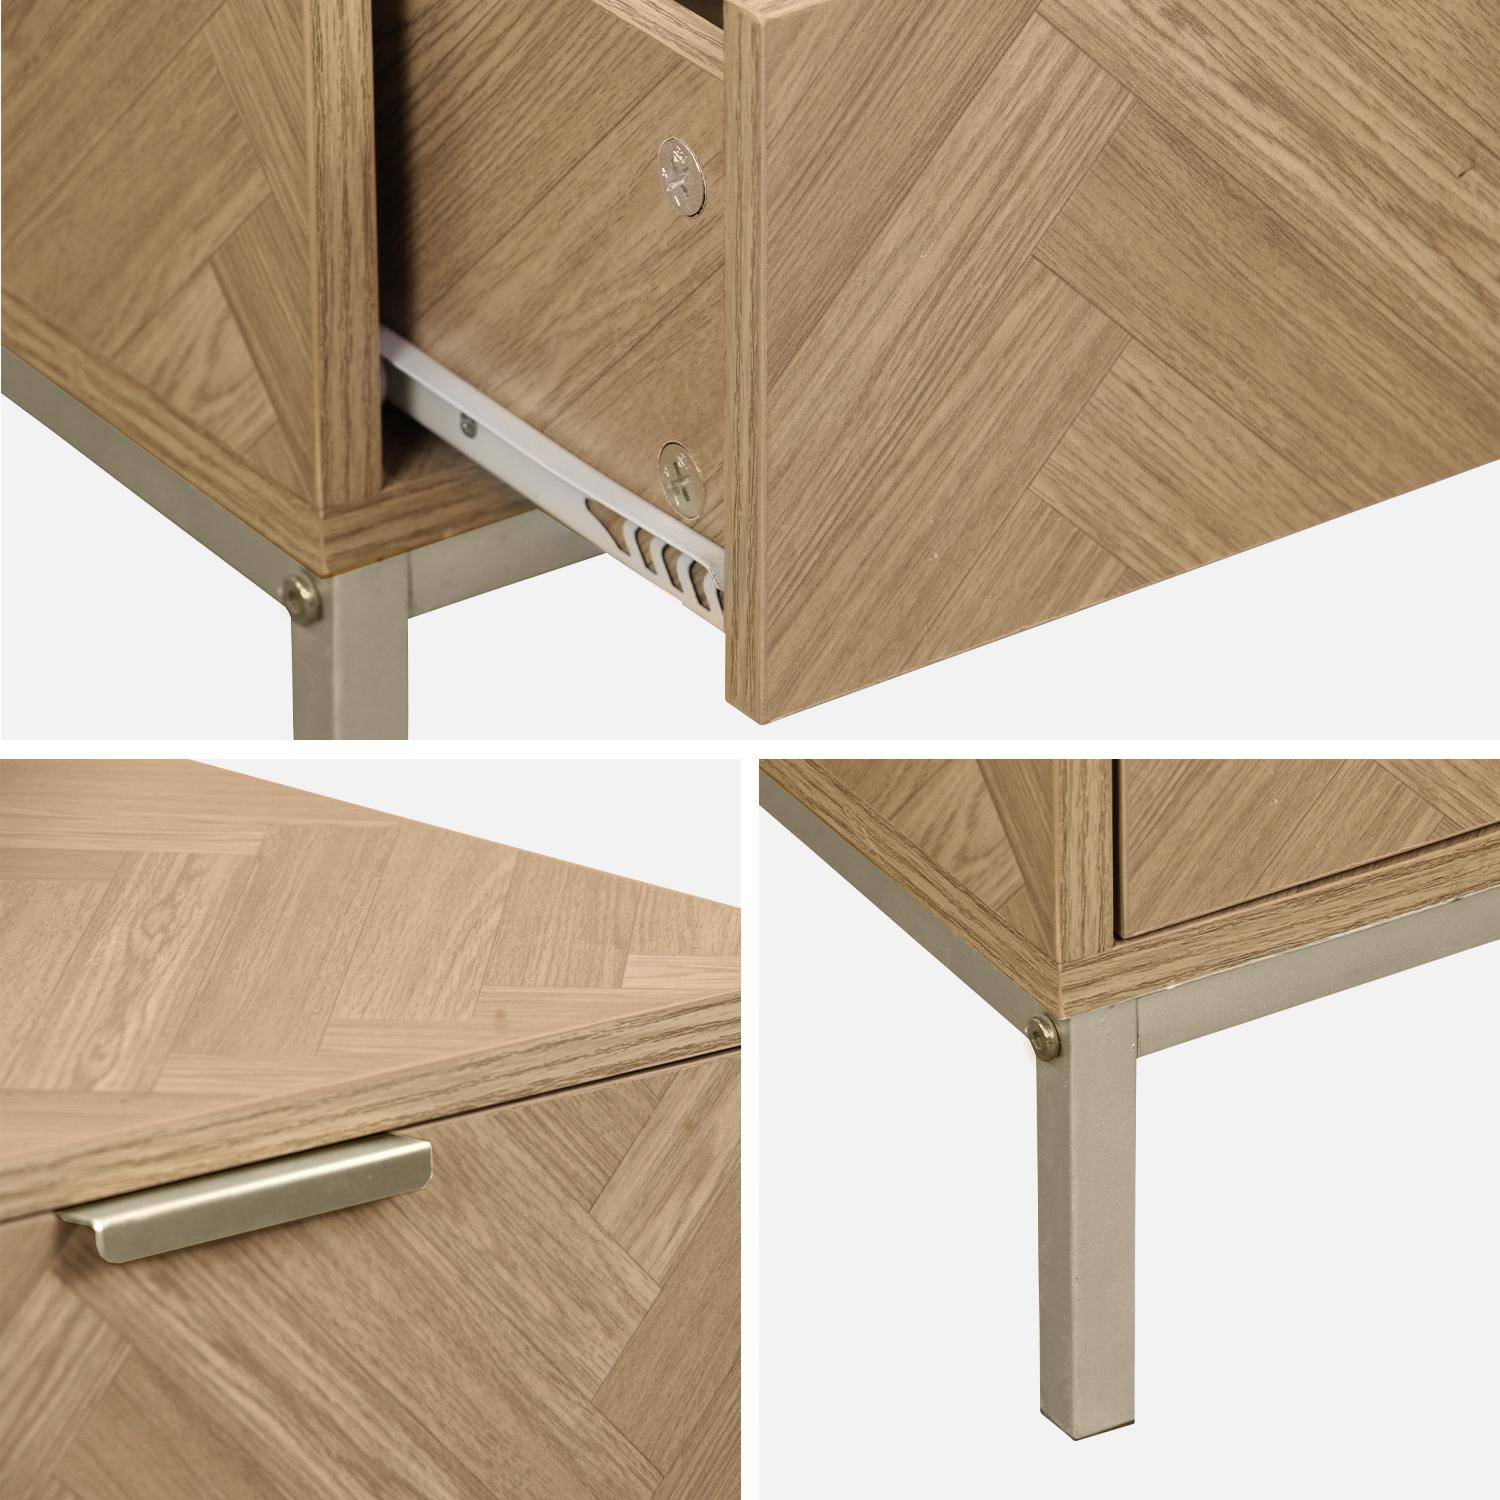 Pair of  contemporary Herringbone bedside table with 2 drawers Photo6